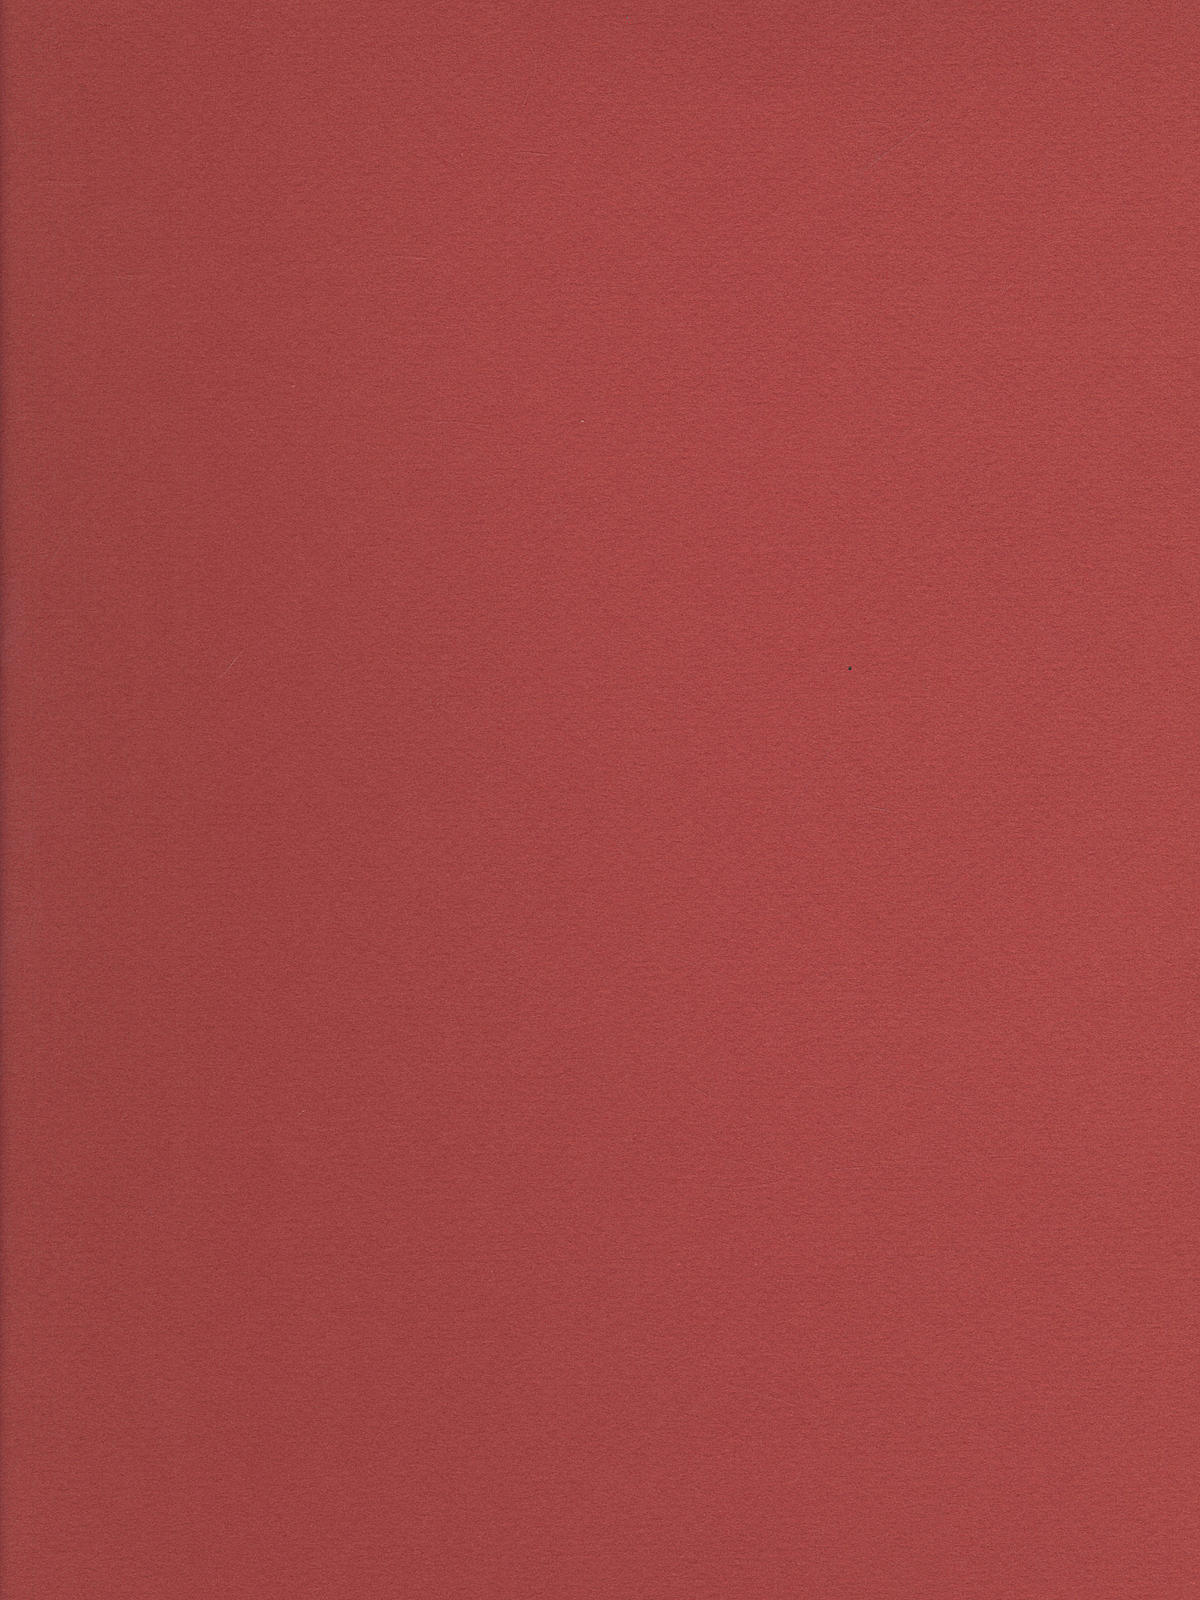 Mi-teintes Tinted Paper Red Earth 19 In. X 25 In.